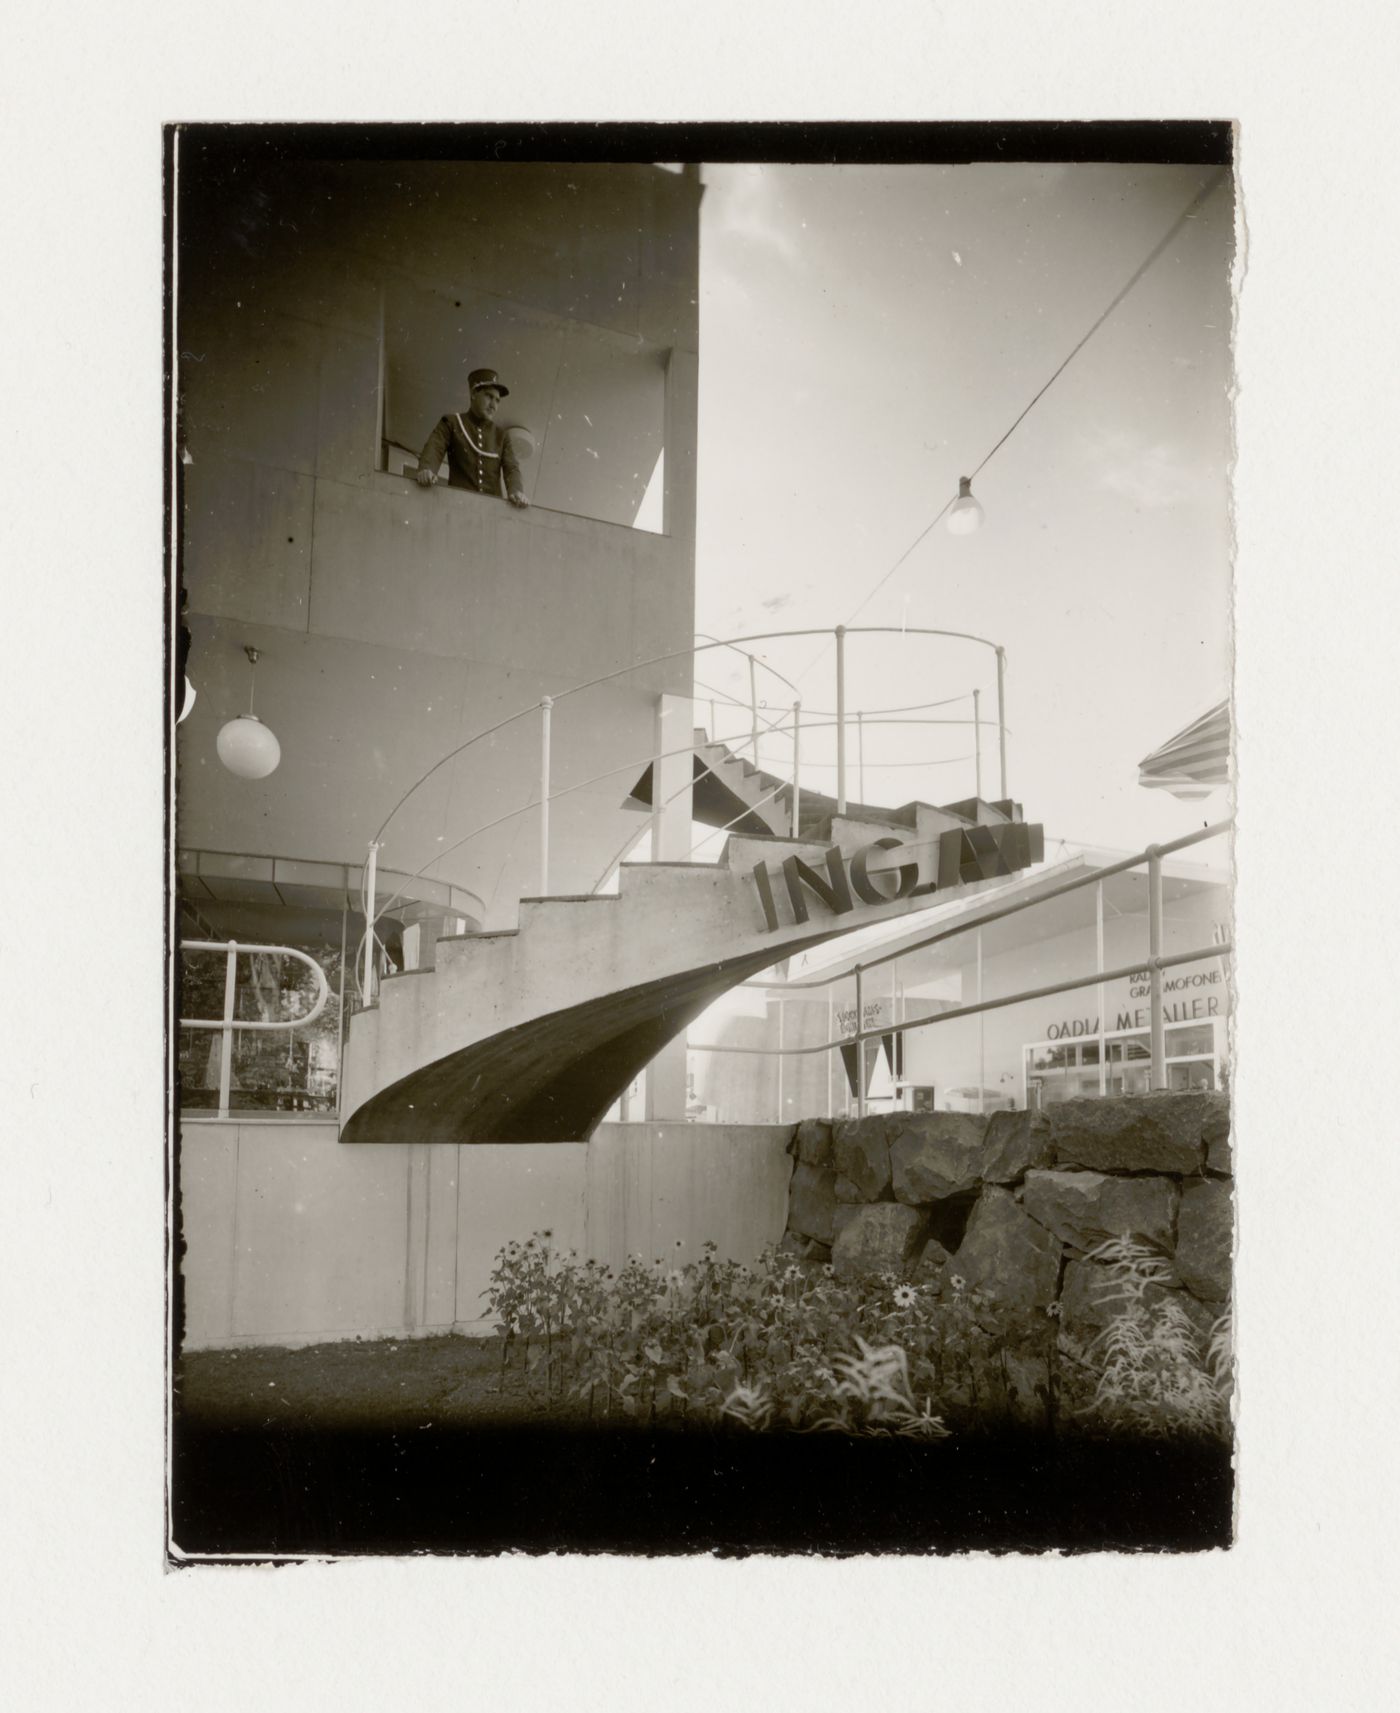 Exterior view of halls 8 and 9 at the Stockholm Exhibition of 1930 showing the stairs with a man standing on the landing, Stockholm